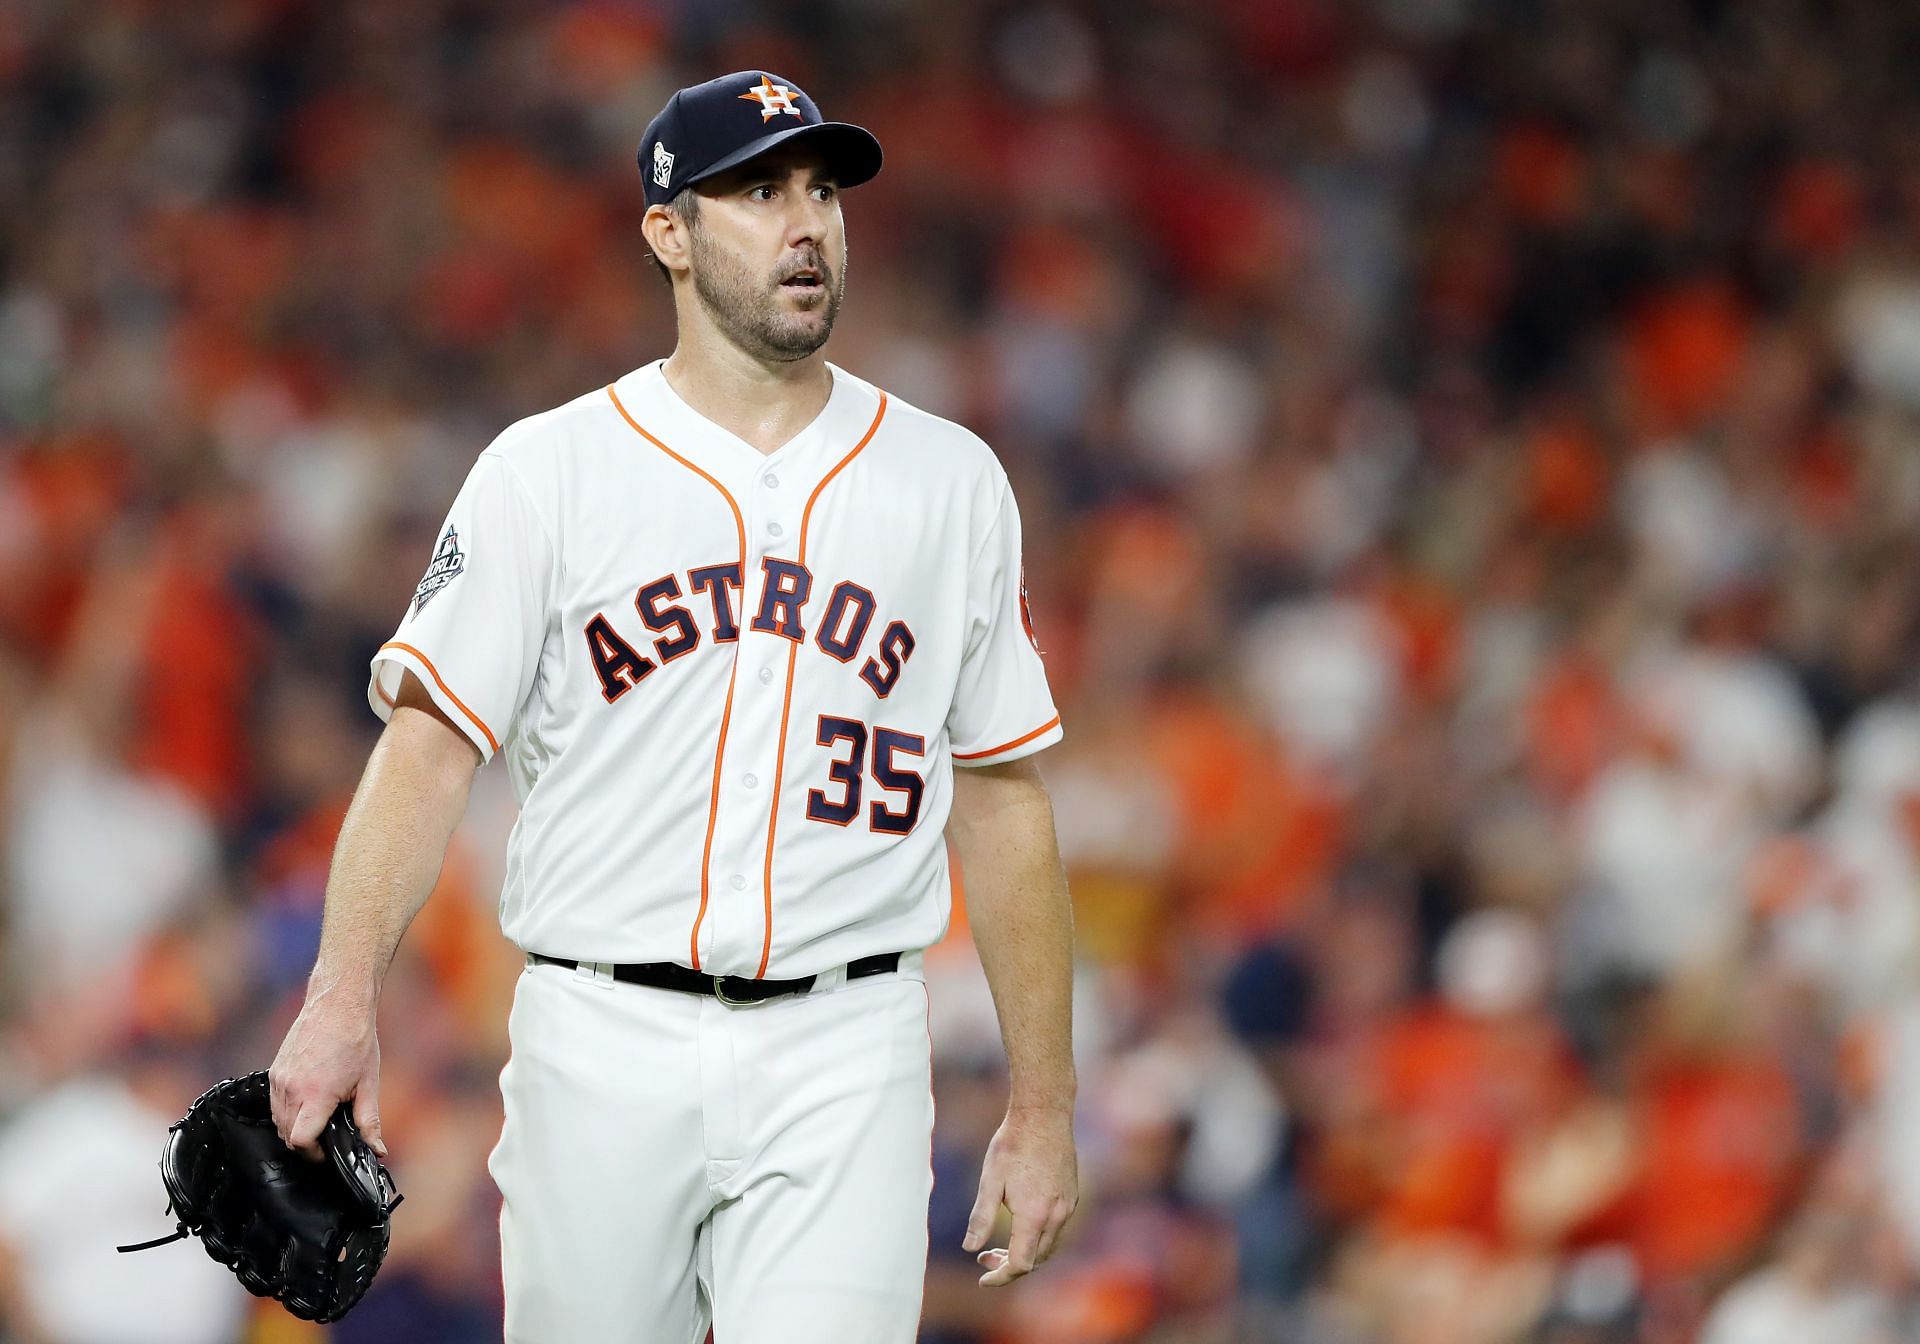 Justin Verlander&rsquo;s third no-hitter made headlines in September 2019, marked by 14 strikeouts.